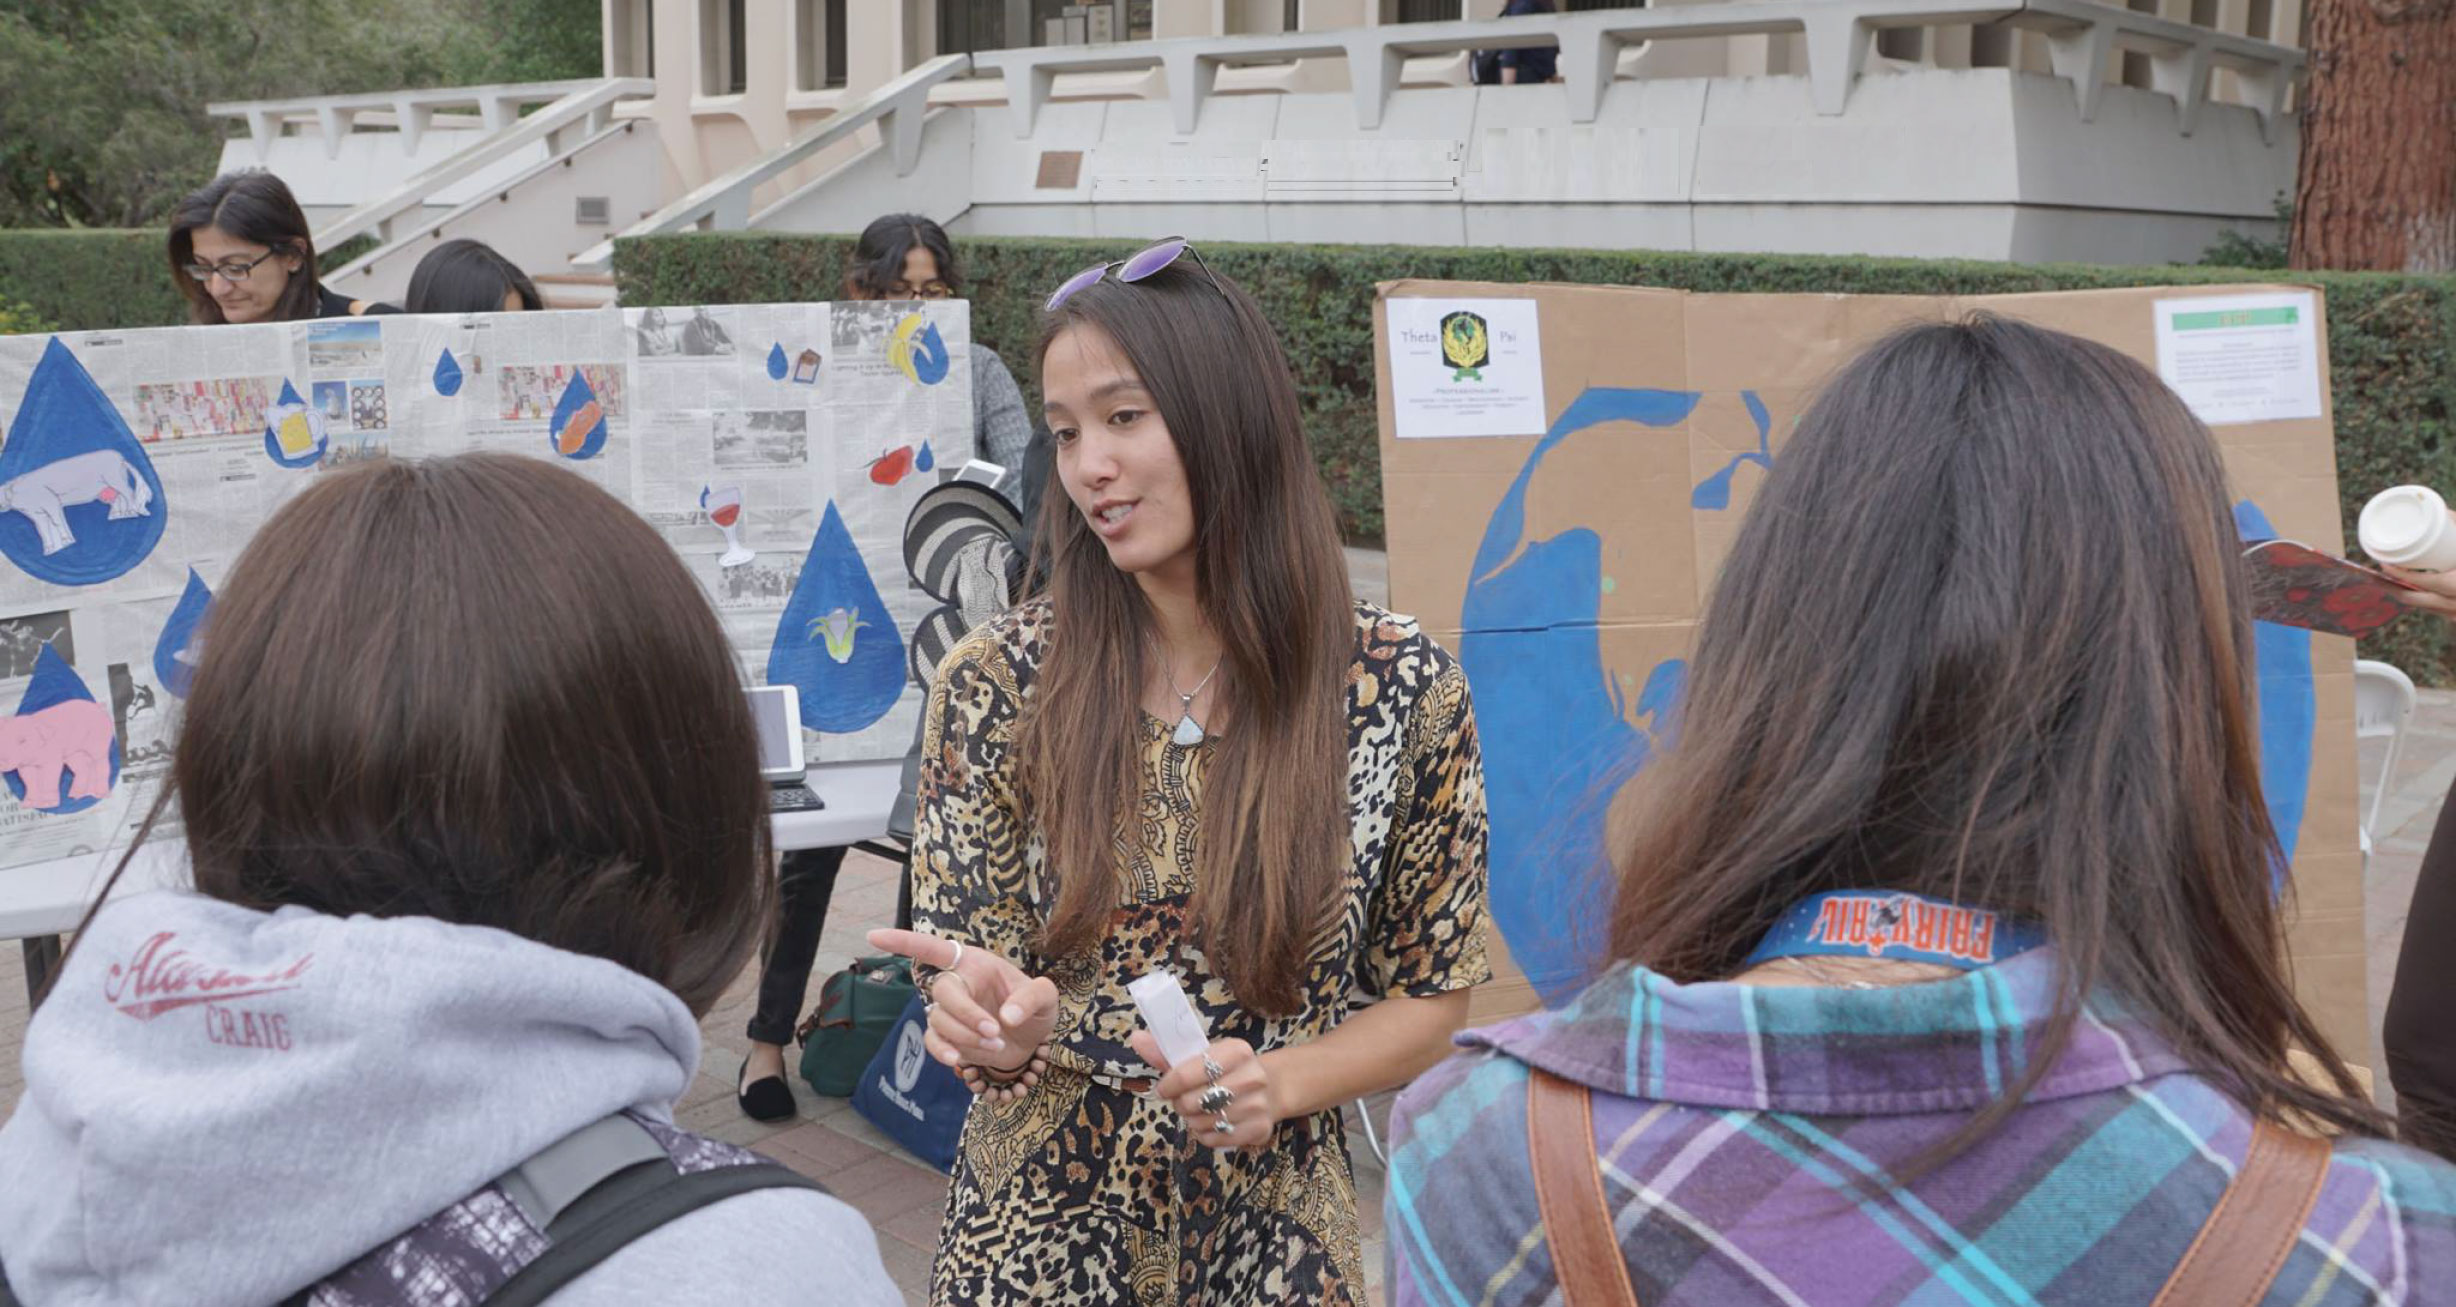 student talking to students on campus about climate change